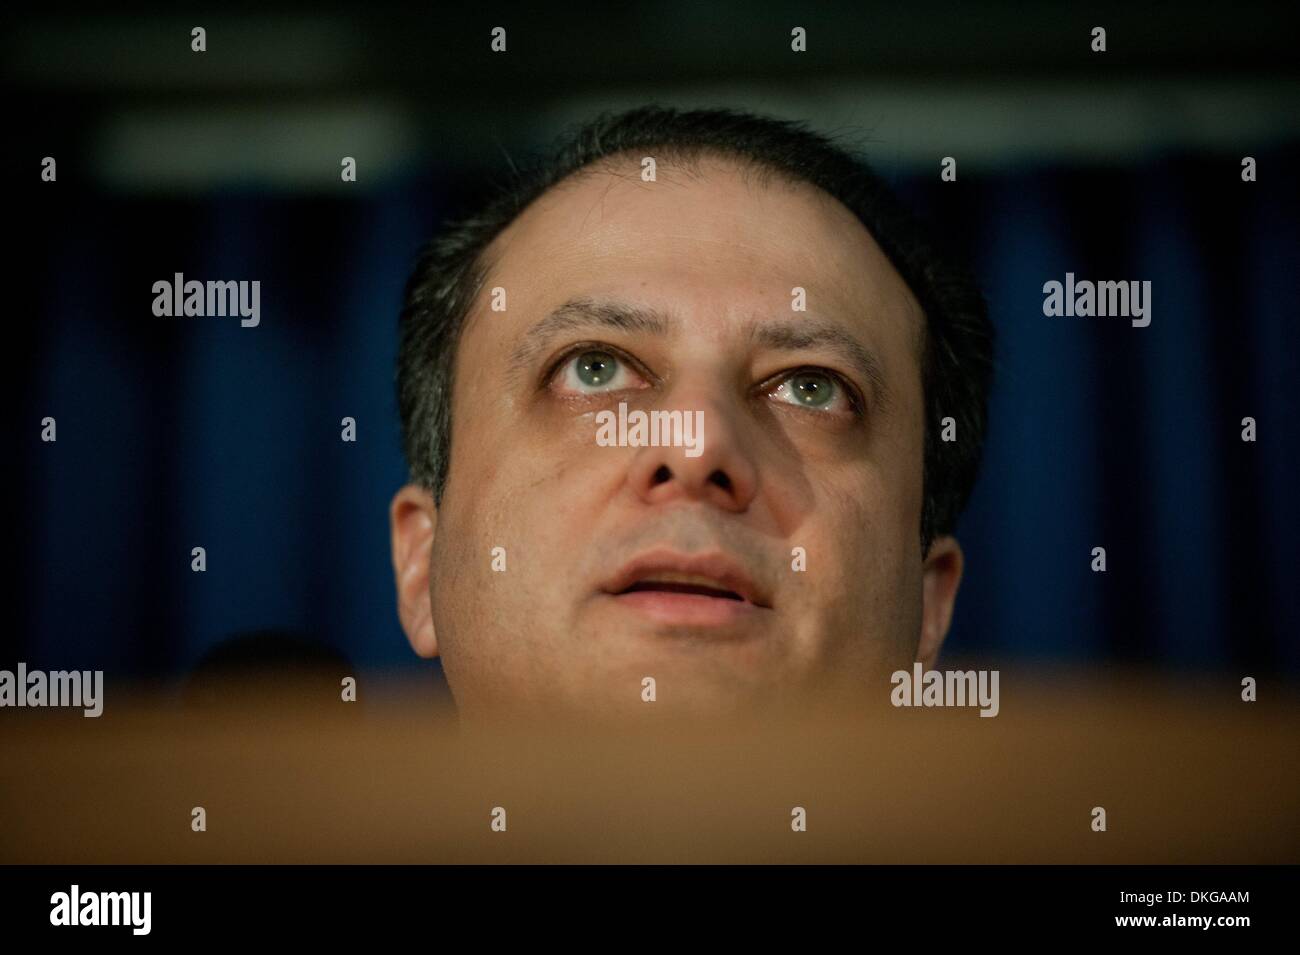 Manhattan, New York, USA. 5th Dec, 2013. PREET BHARARA, the United States Attorney for the Southern District of New York announces charges against 49 defendants for participating in a widespread nine-year fraud scheme to illegally obtain nearly half a million dollars in Medicaid benefits, Thursday, December 5, 2013. (One St. Andrew's Plaza, Lobby). Credit:  ZUMA Press, Inc./Alamy Live News Stock Photo